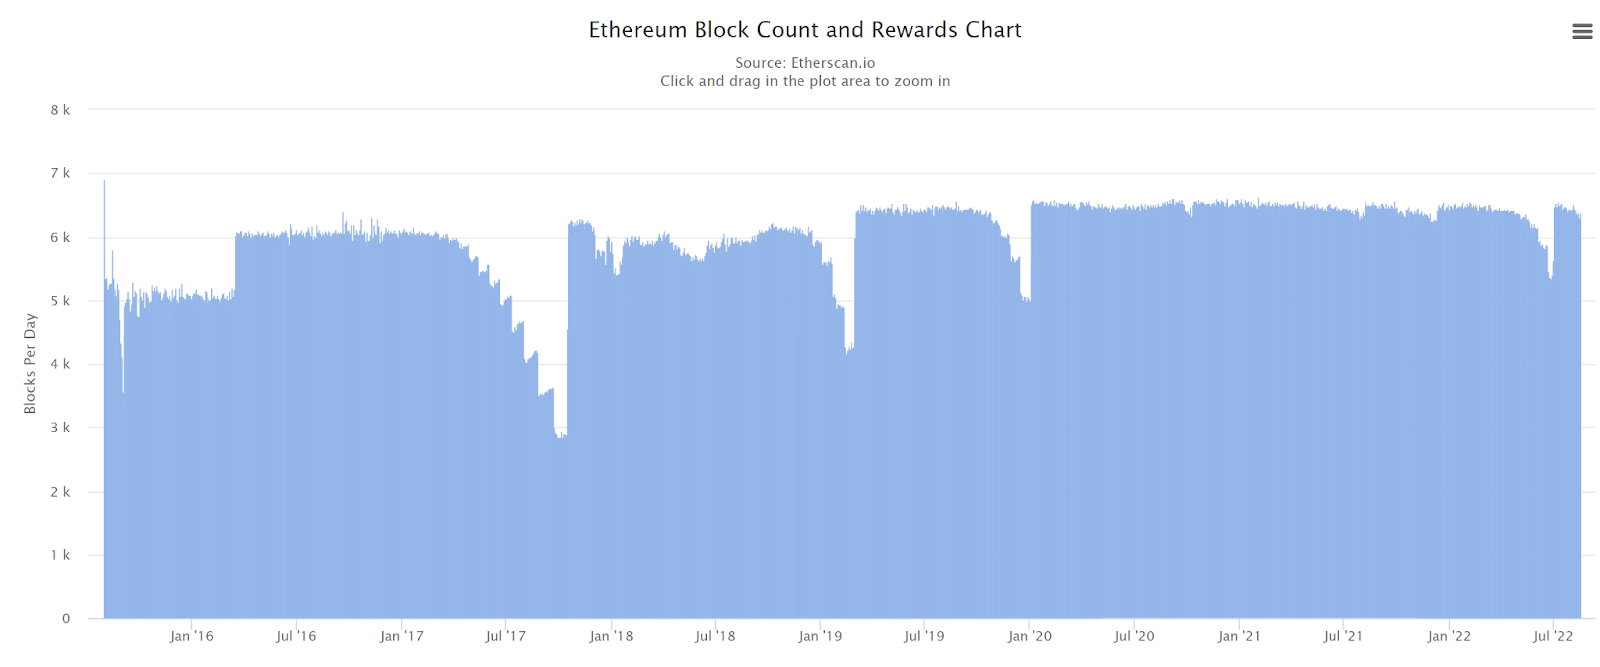 A graph showing Ethereum Block Count and Rewards Chart between January 2016 until July 2022